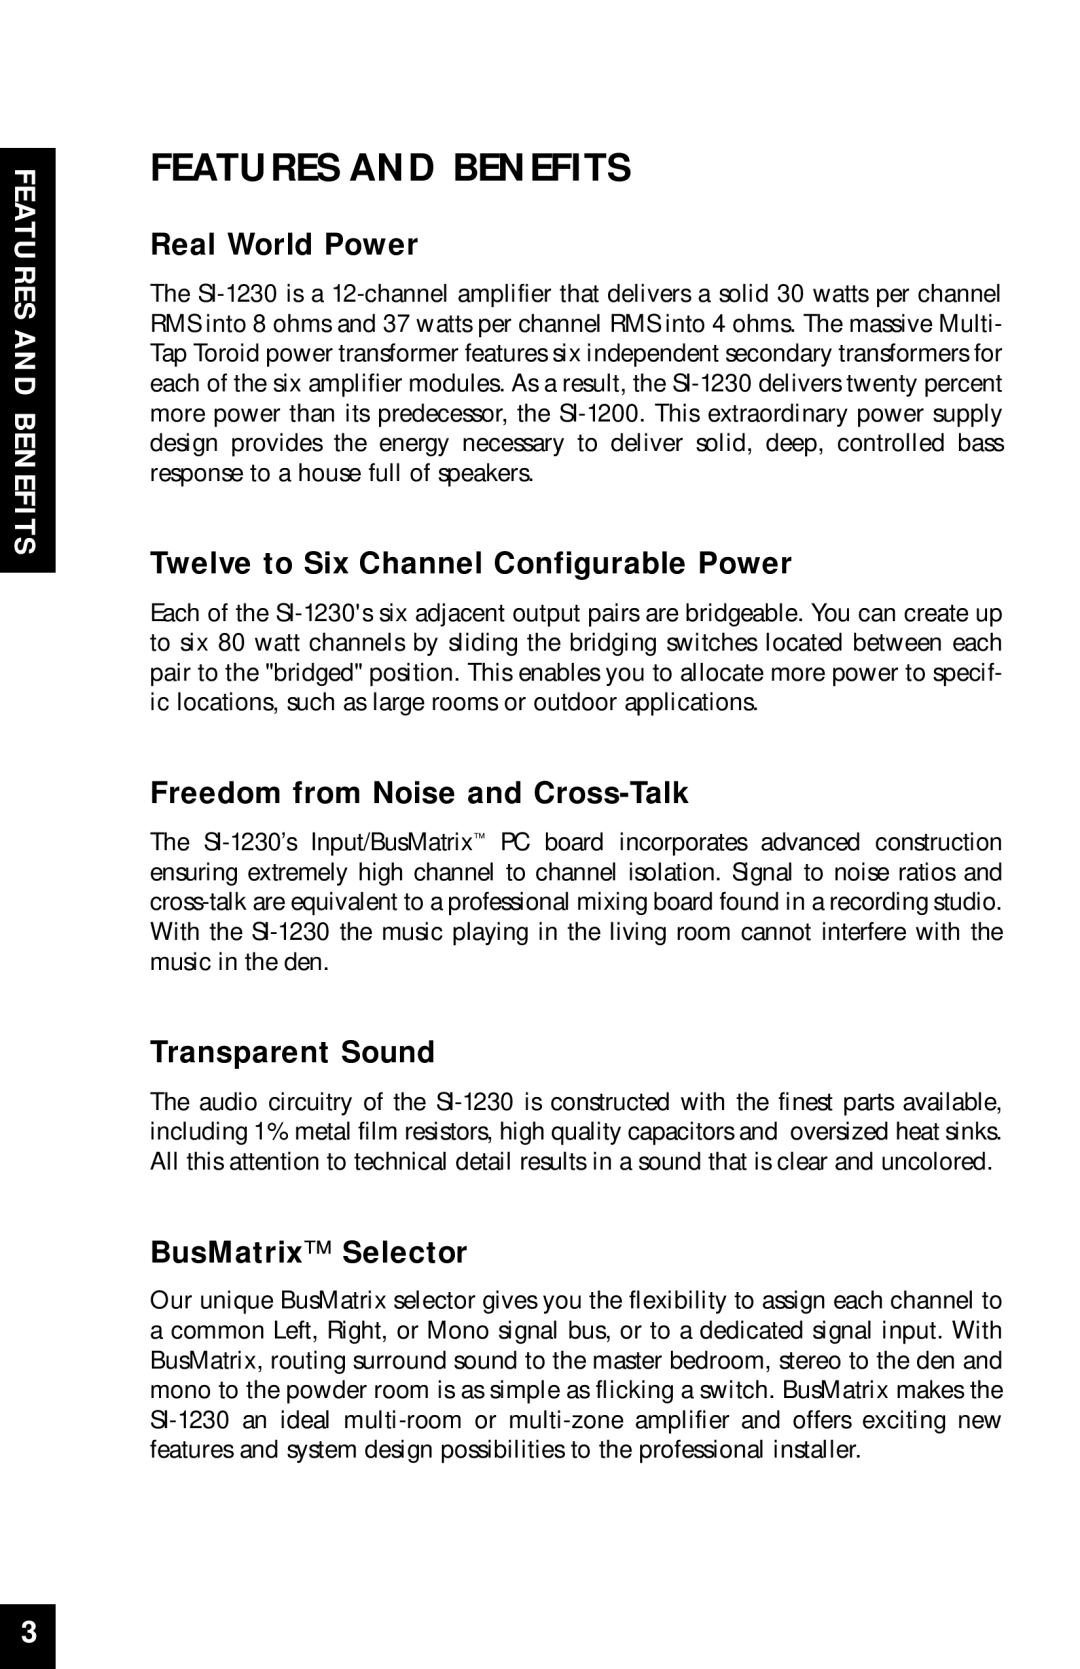 Niles Audio SI-1230 Features And Benefits, Real World Power, Twelve to Six Channel Configurable Power, Transparent Sound 